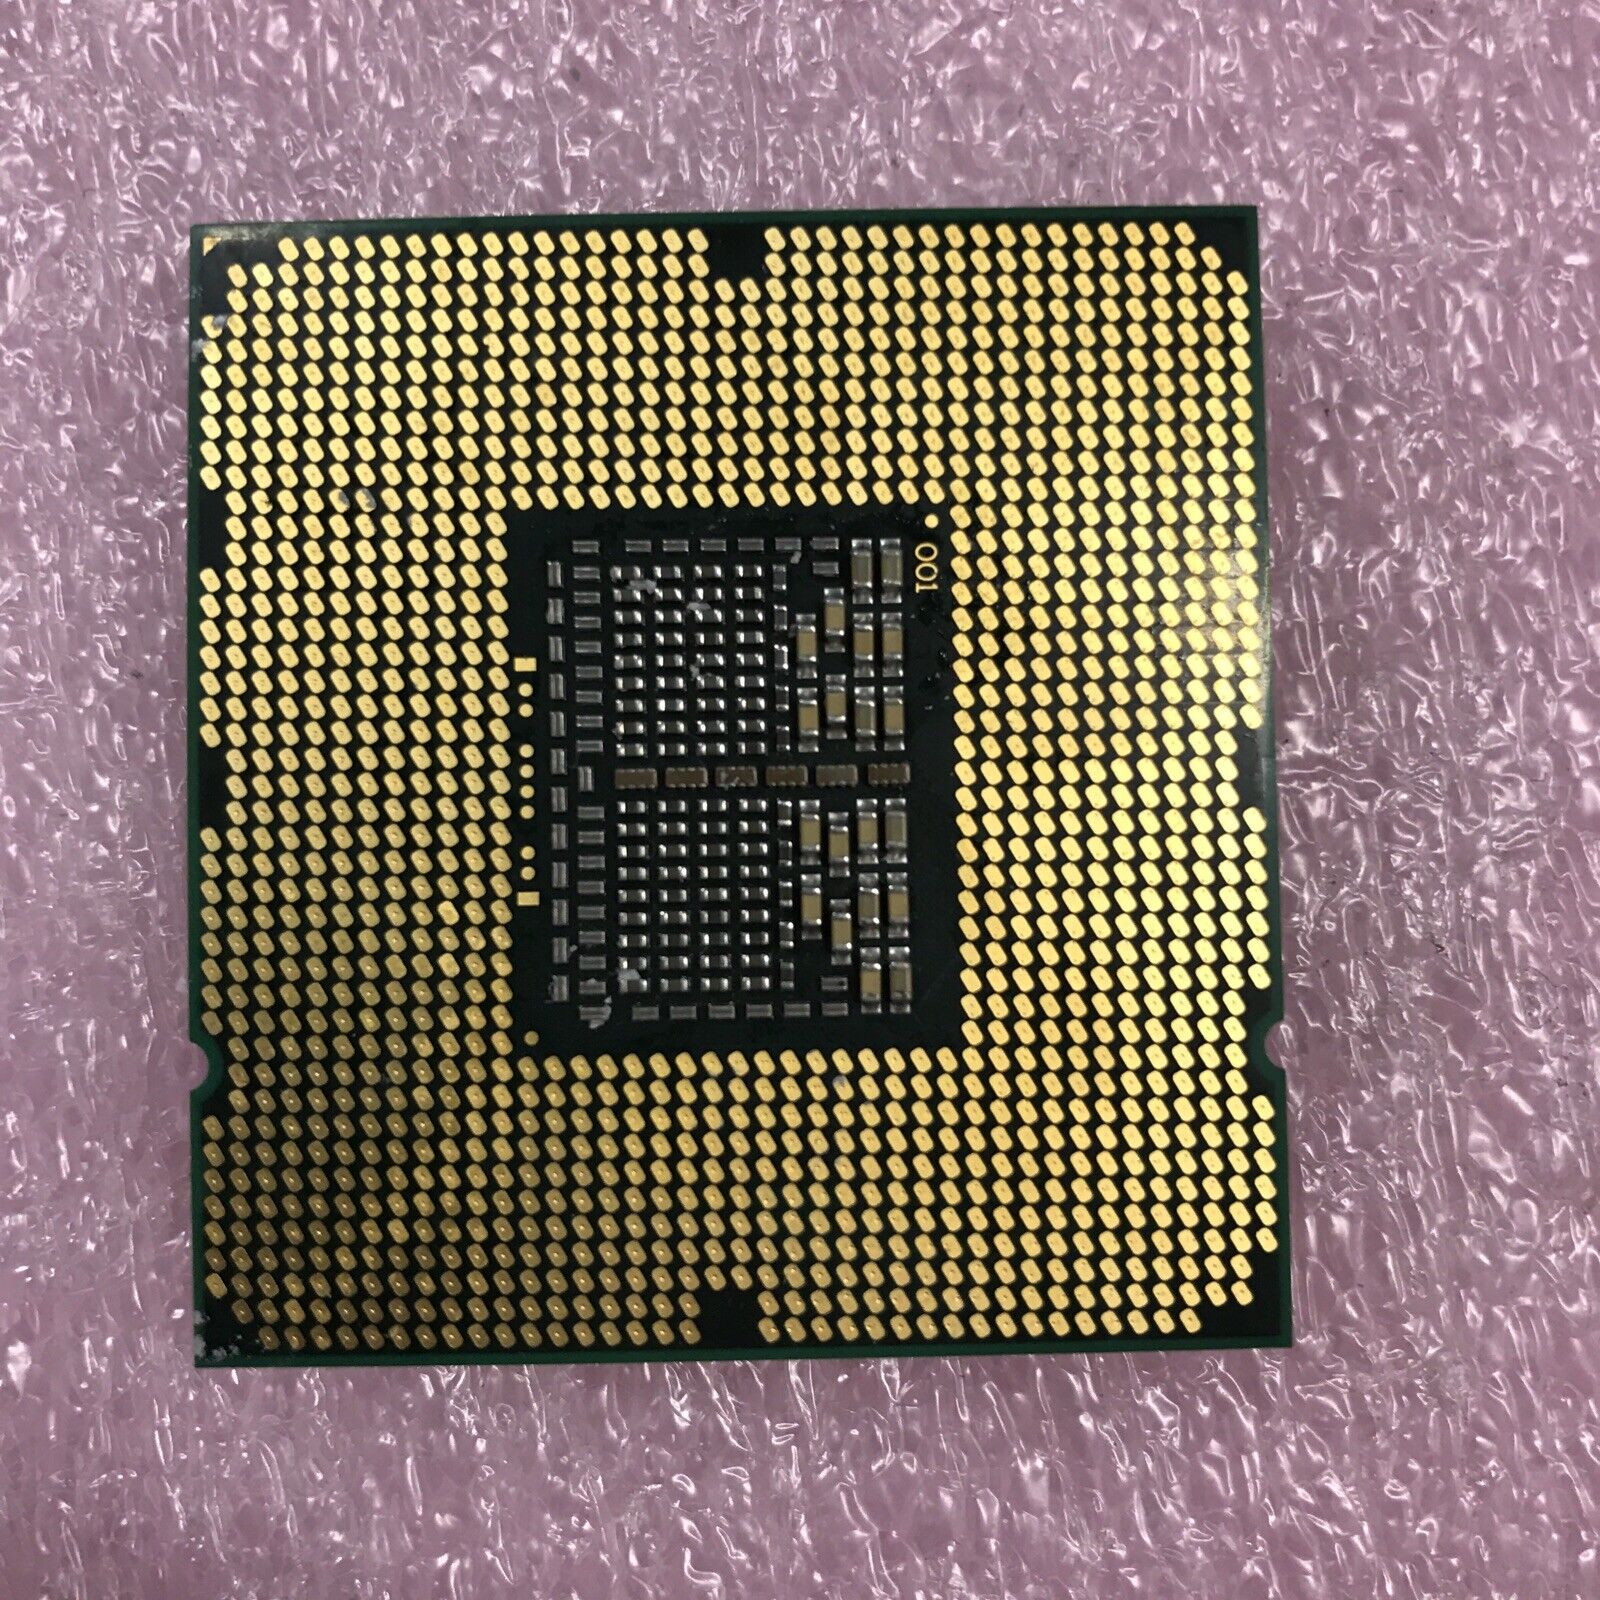 (Lot of 4) Intel E5540 SLBF6 2.53GHz (Tested and Working)